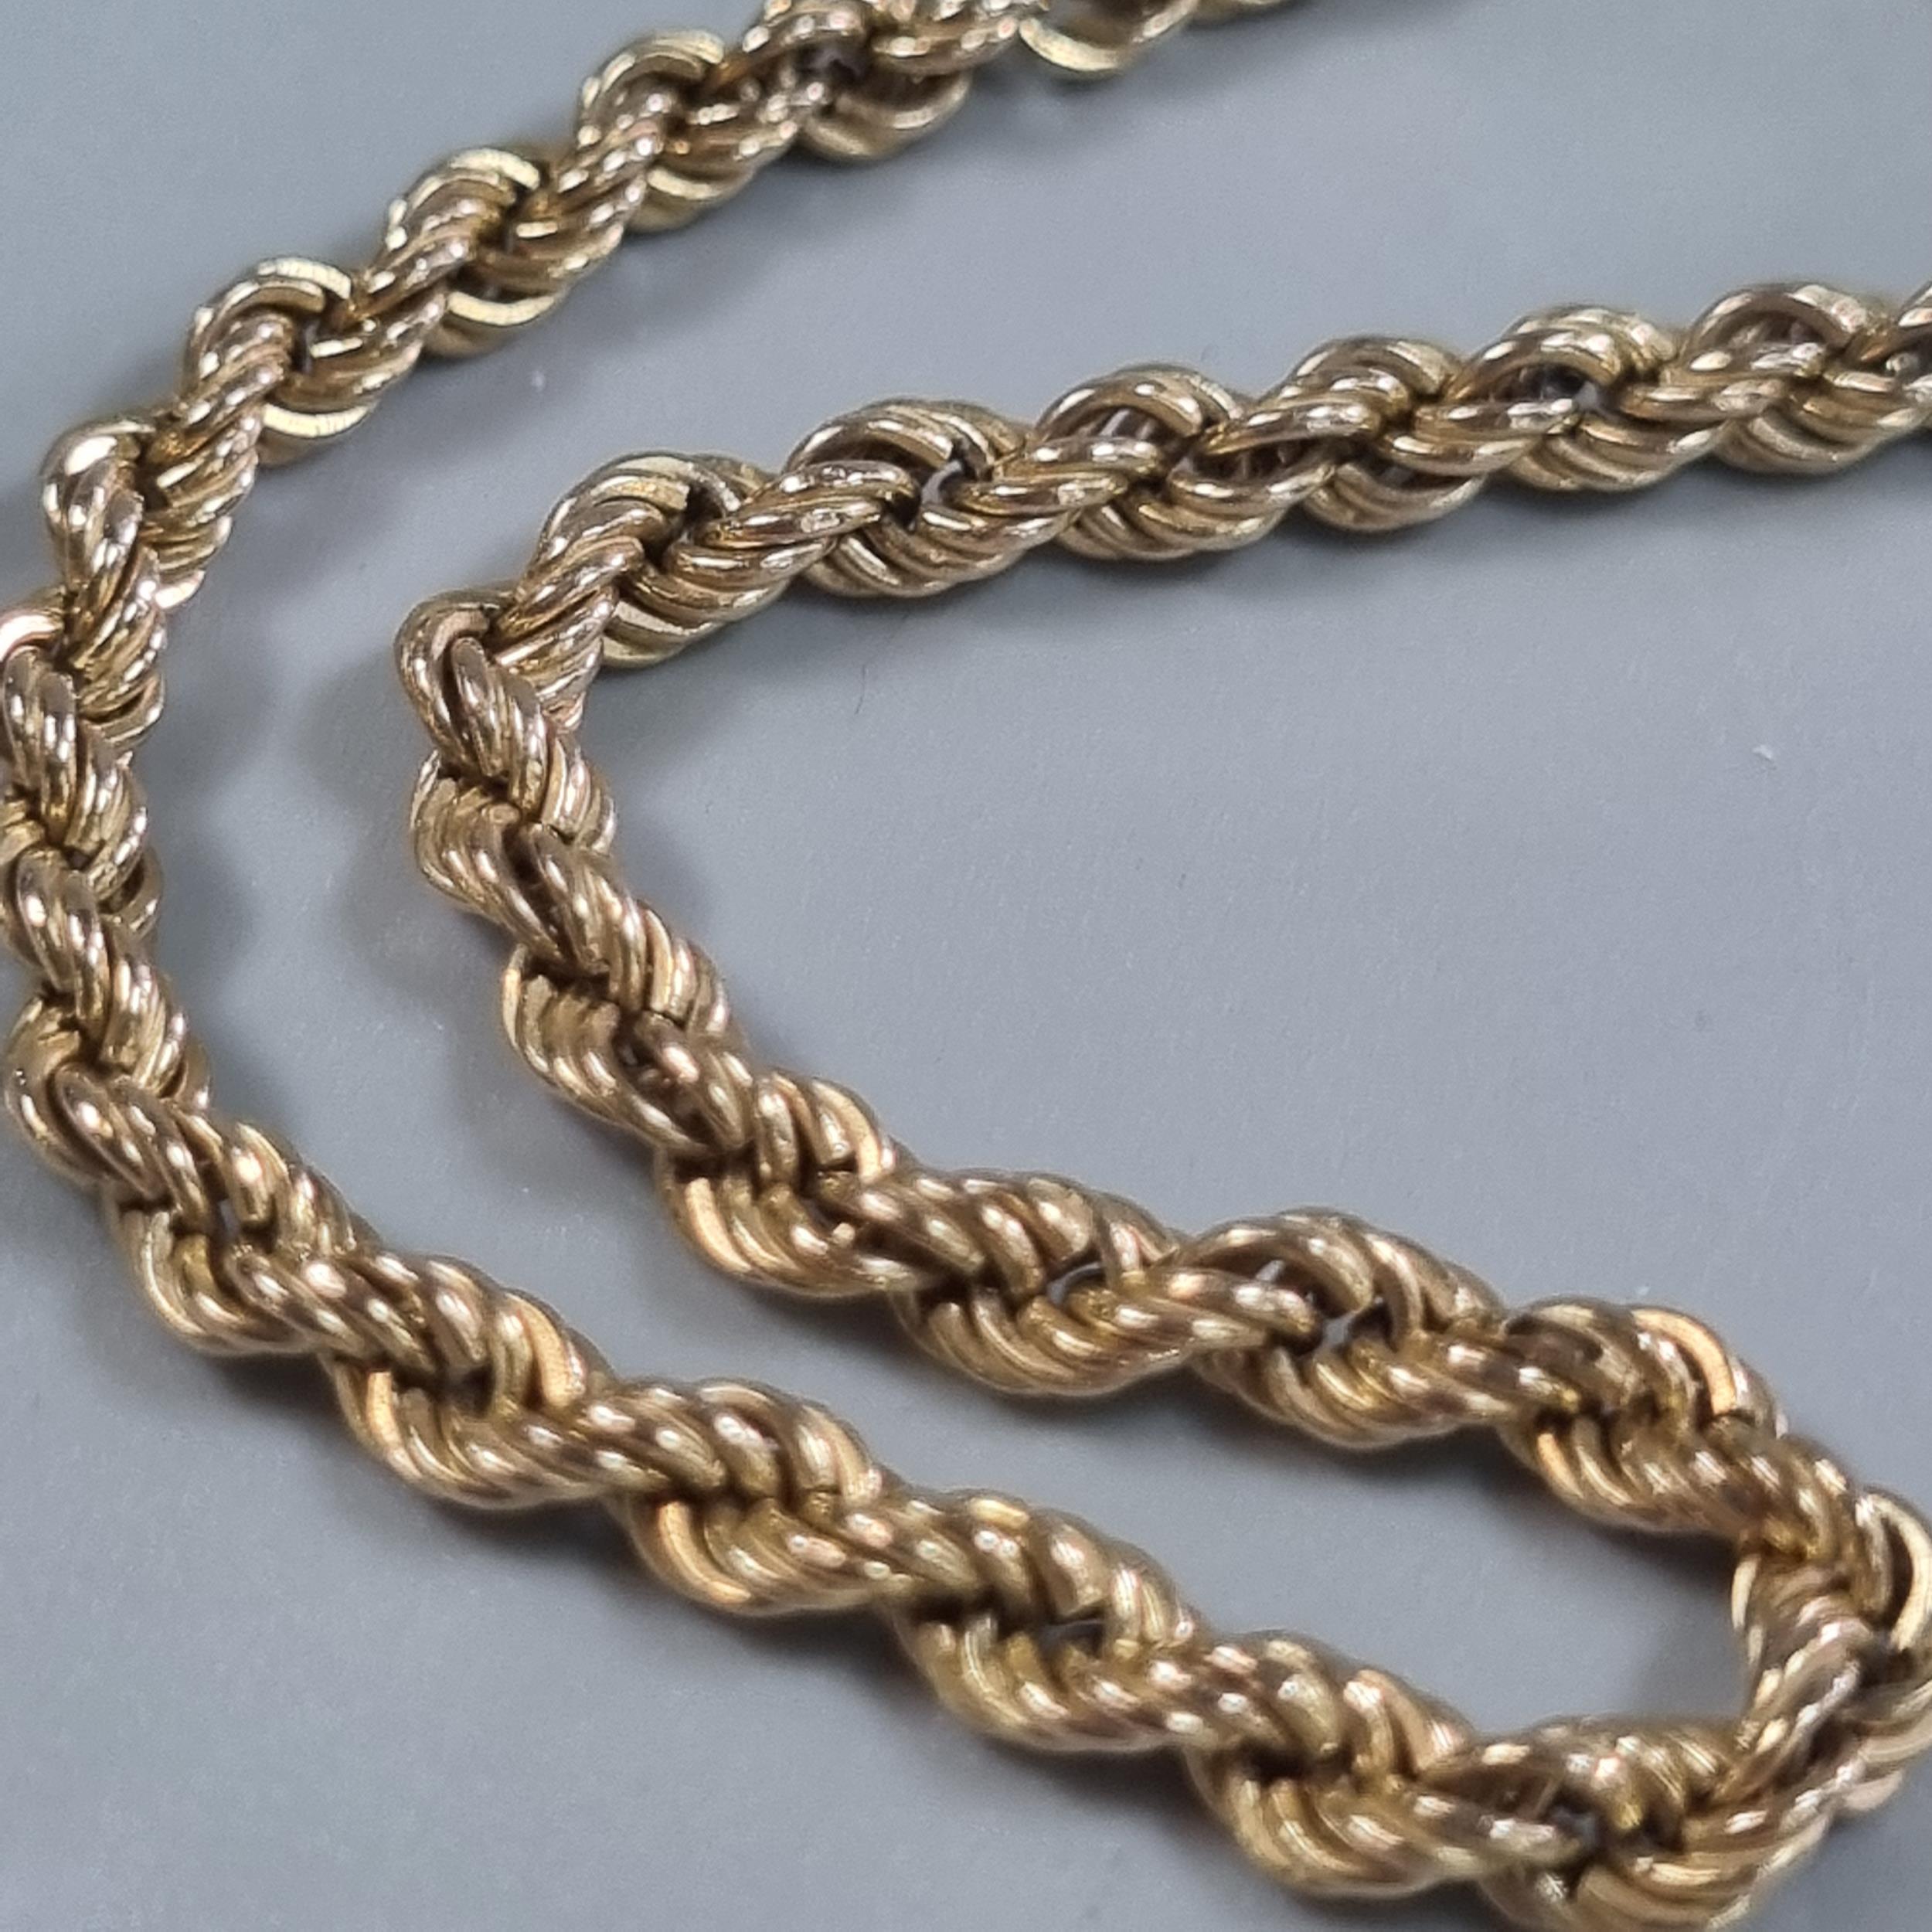 9ct gold rope twist bracelet. 2.2g approx. together with a 9ct gold crucifix pendant and plated - Image 3 of 3